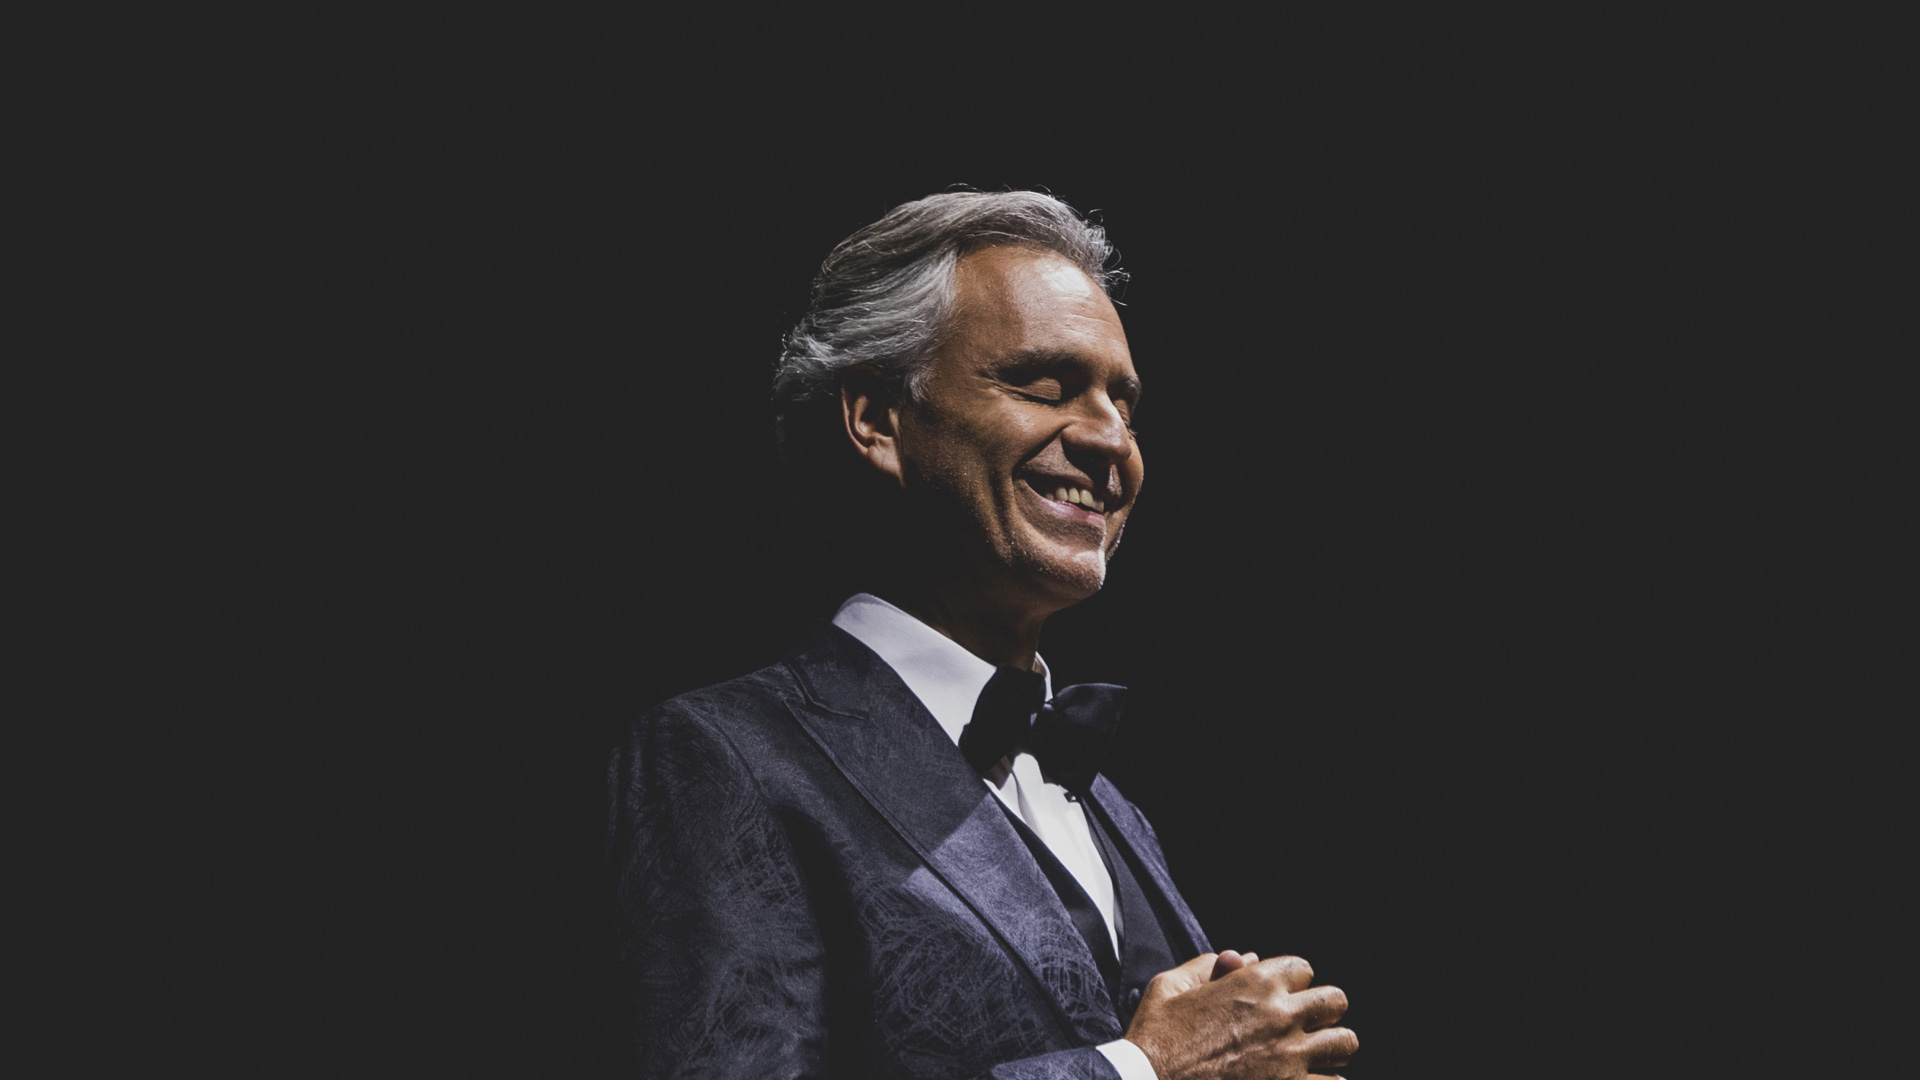 Andrea Bocelli to cameo in his own biopic